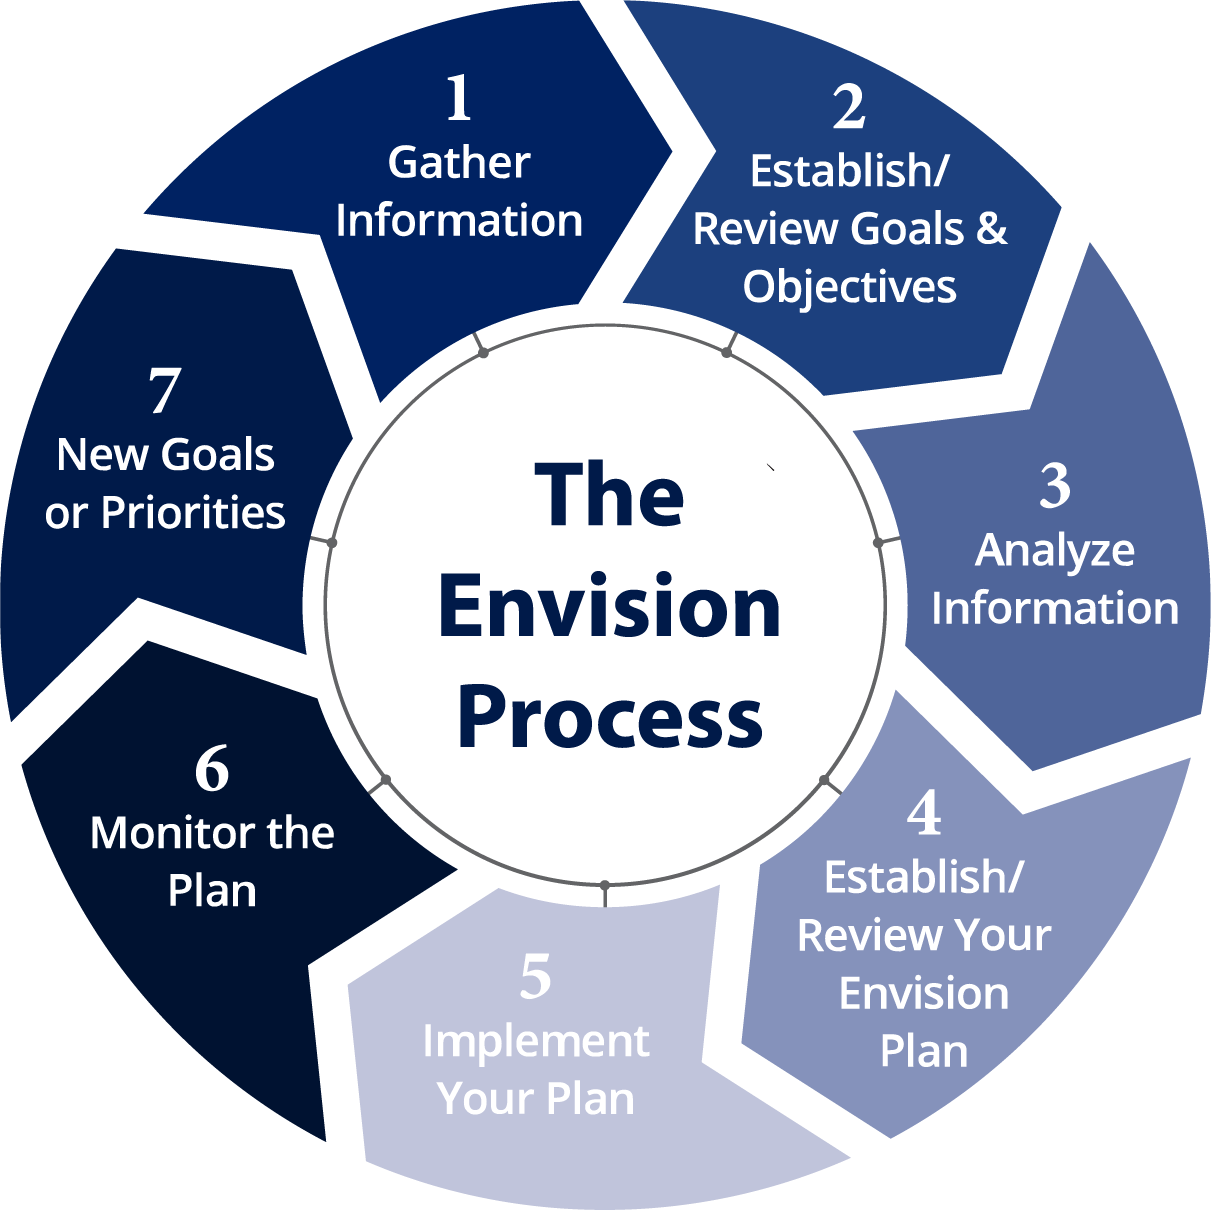 The Envision Process, 1 Gather Information, 2 Establish and Review Goals and Objectives, 3 Analyze Information, 4 Establish and Review Your Envision Plan, 5 Implement your plan, 6 Monitor your plan, 7 New Goals or Priorites